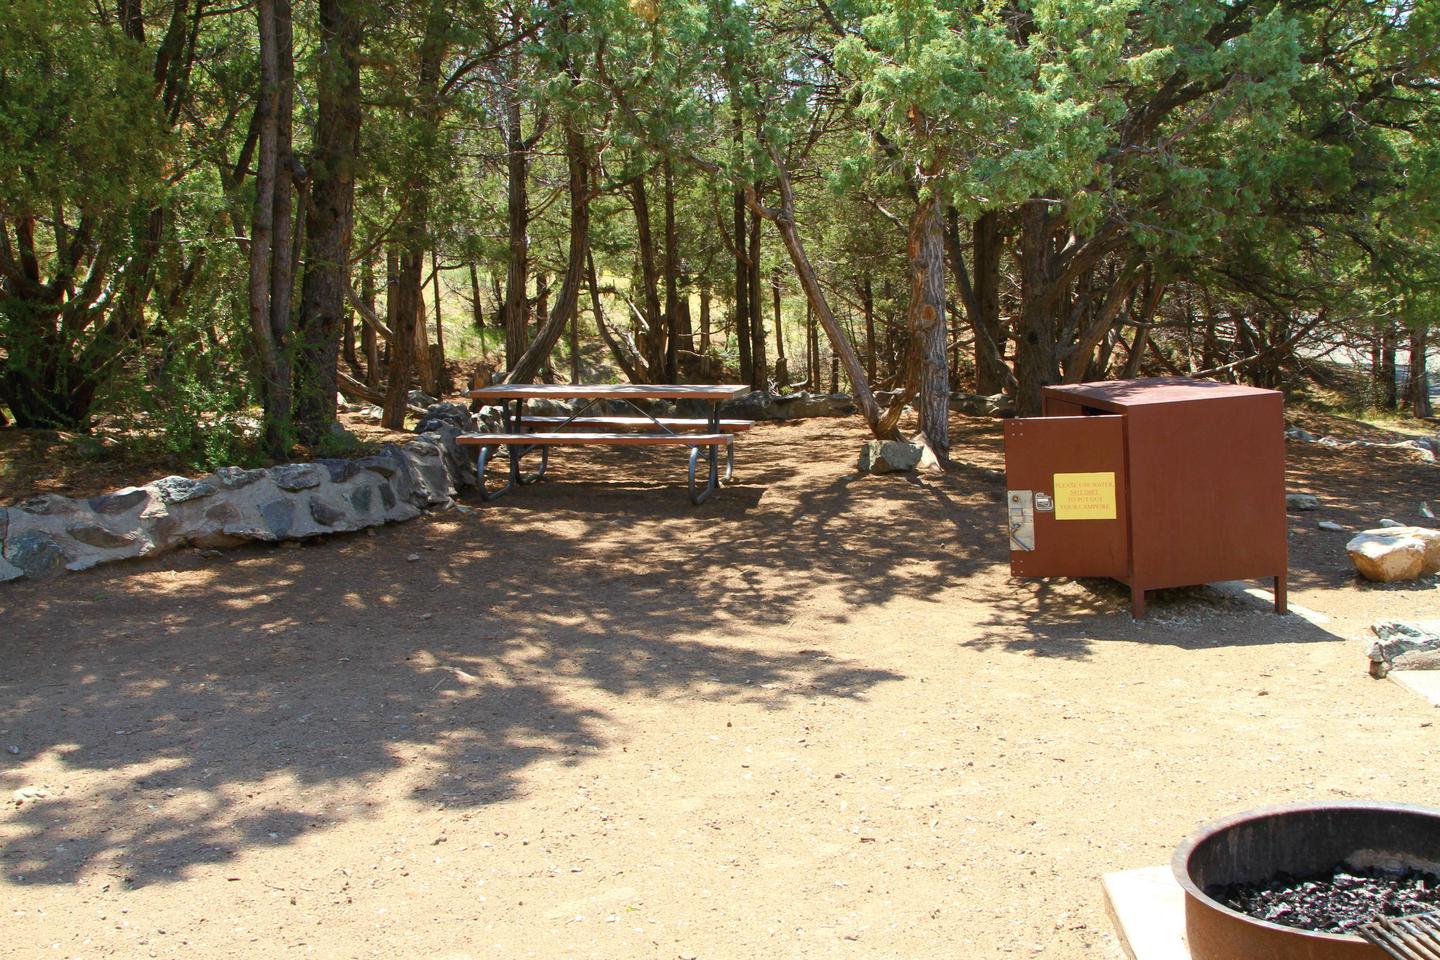 View from inside Site #80 of tent pad, bear box, fire ring, picnic table, and the very many trees that are somehow inside the site. Reminder that hammocks are not allowed in the campground.Site #80, Pinon Flats Campground